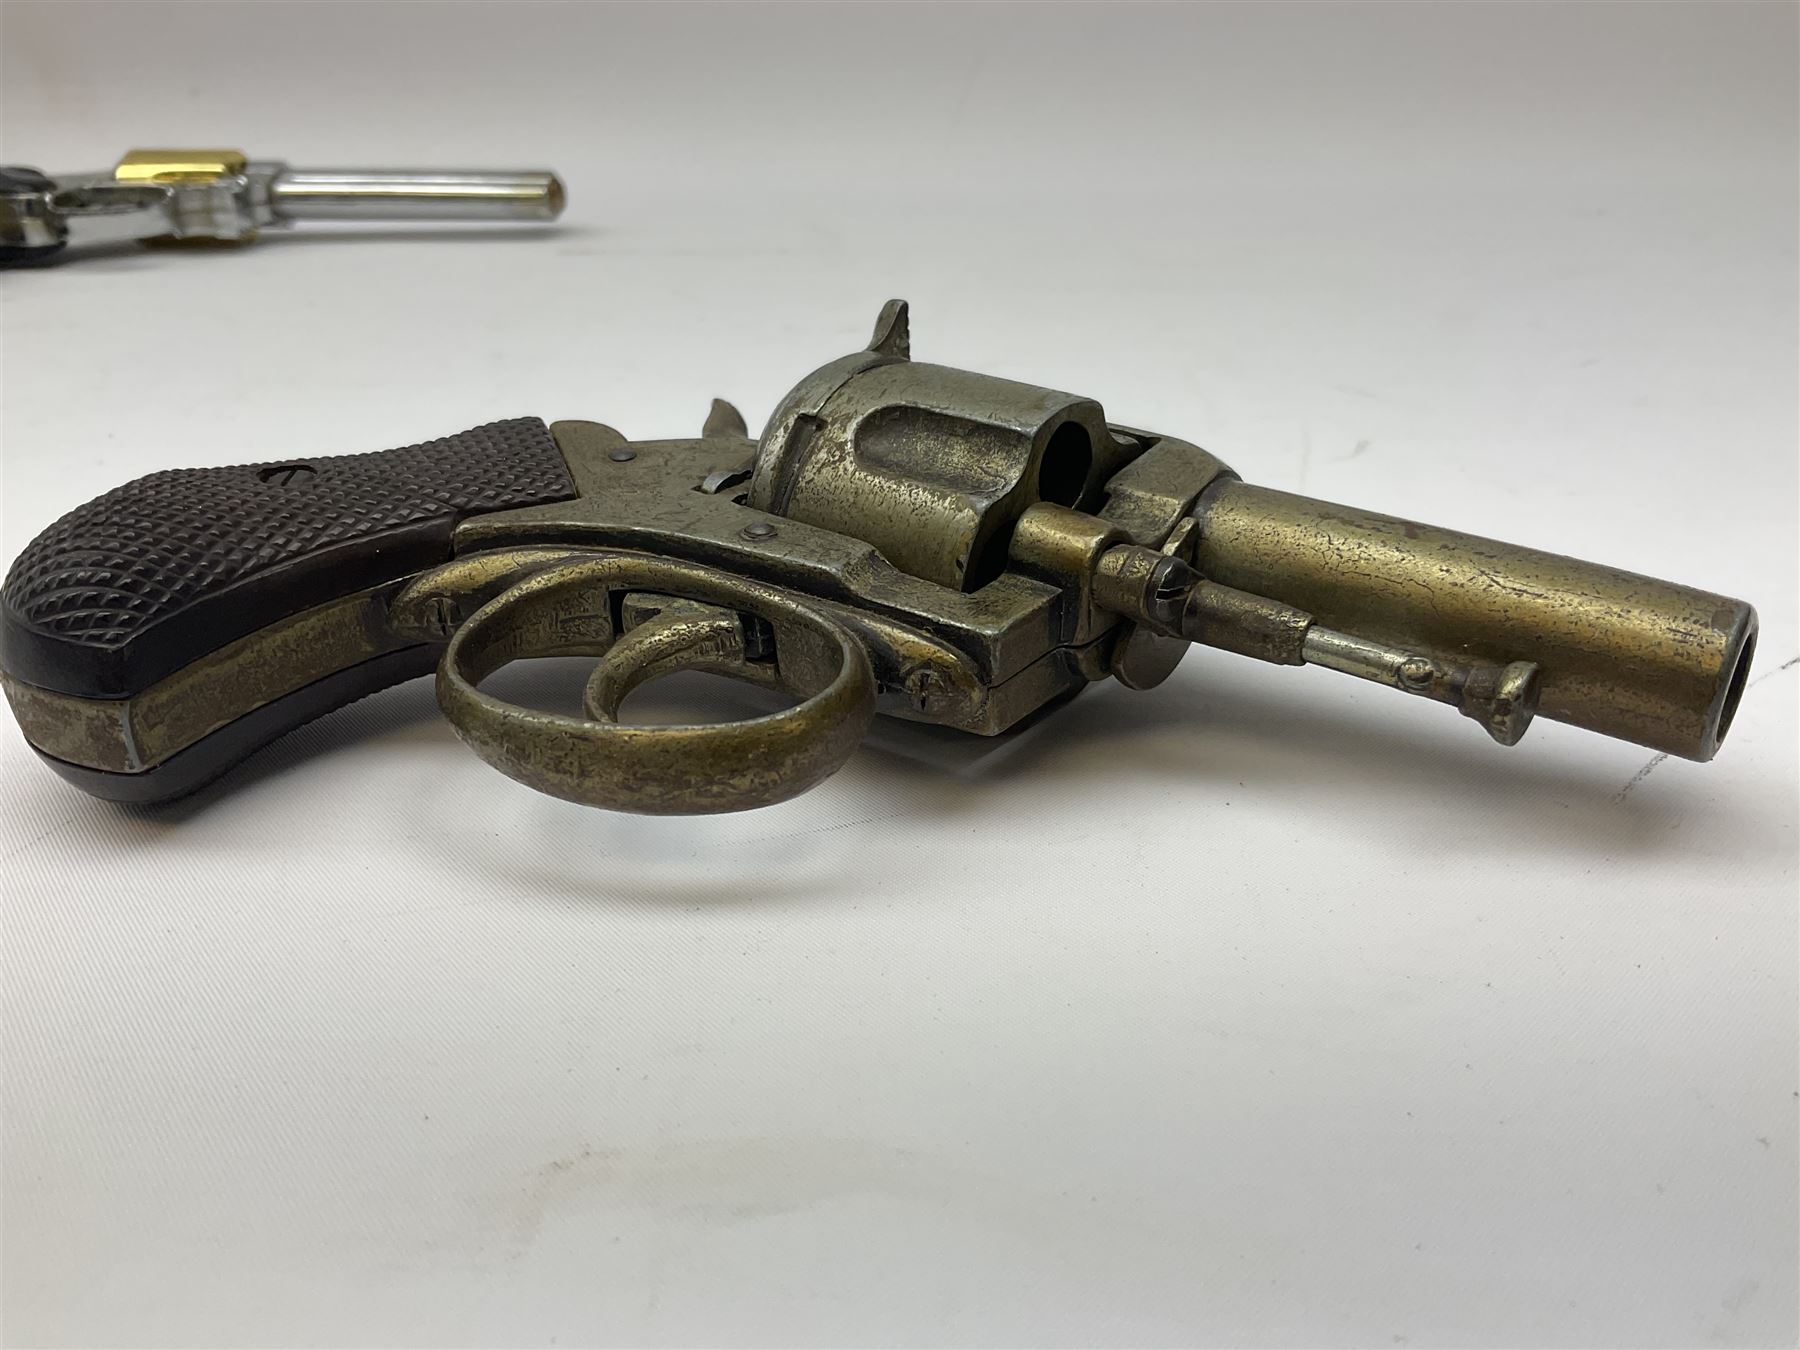 Buy antique sewing kit in the form of a revolver ⭐️ Rare gun